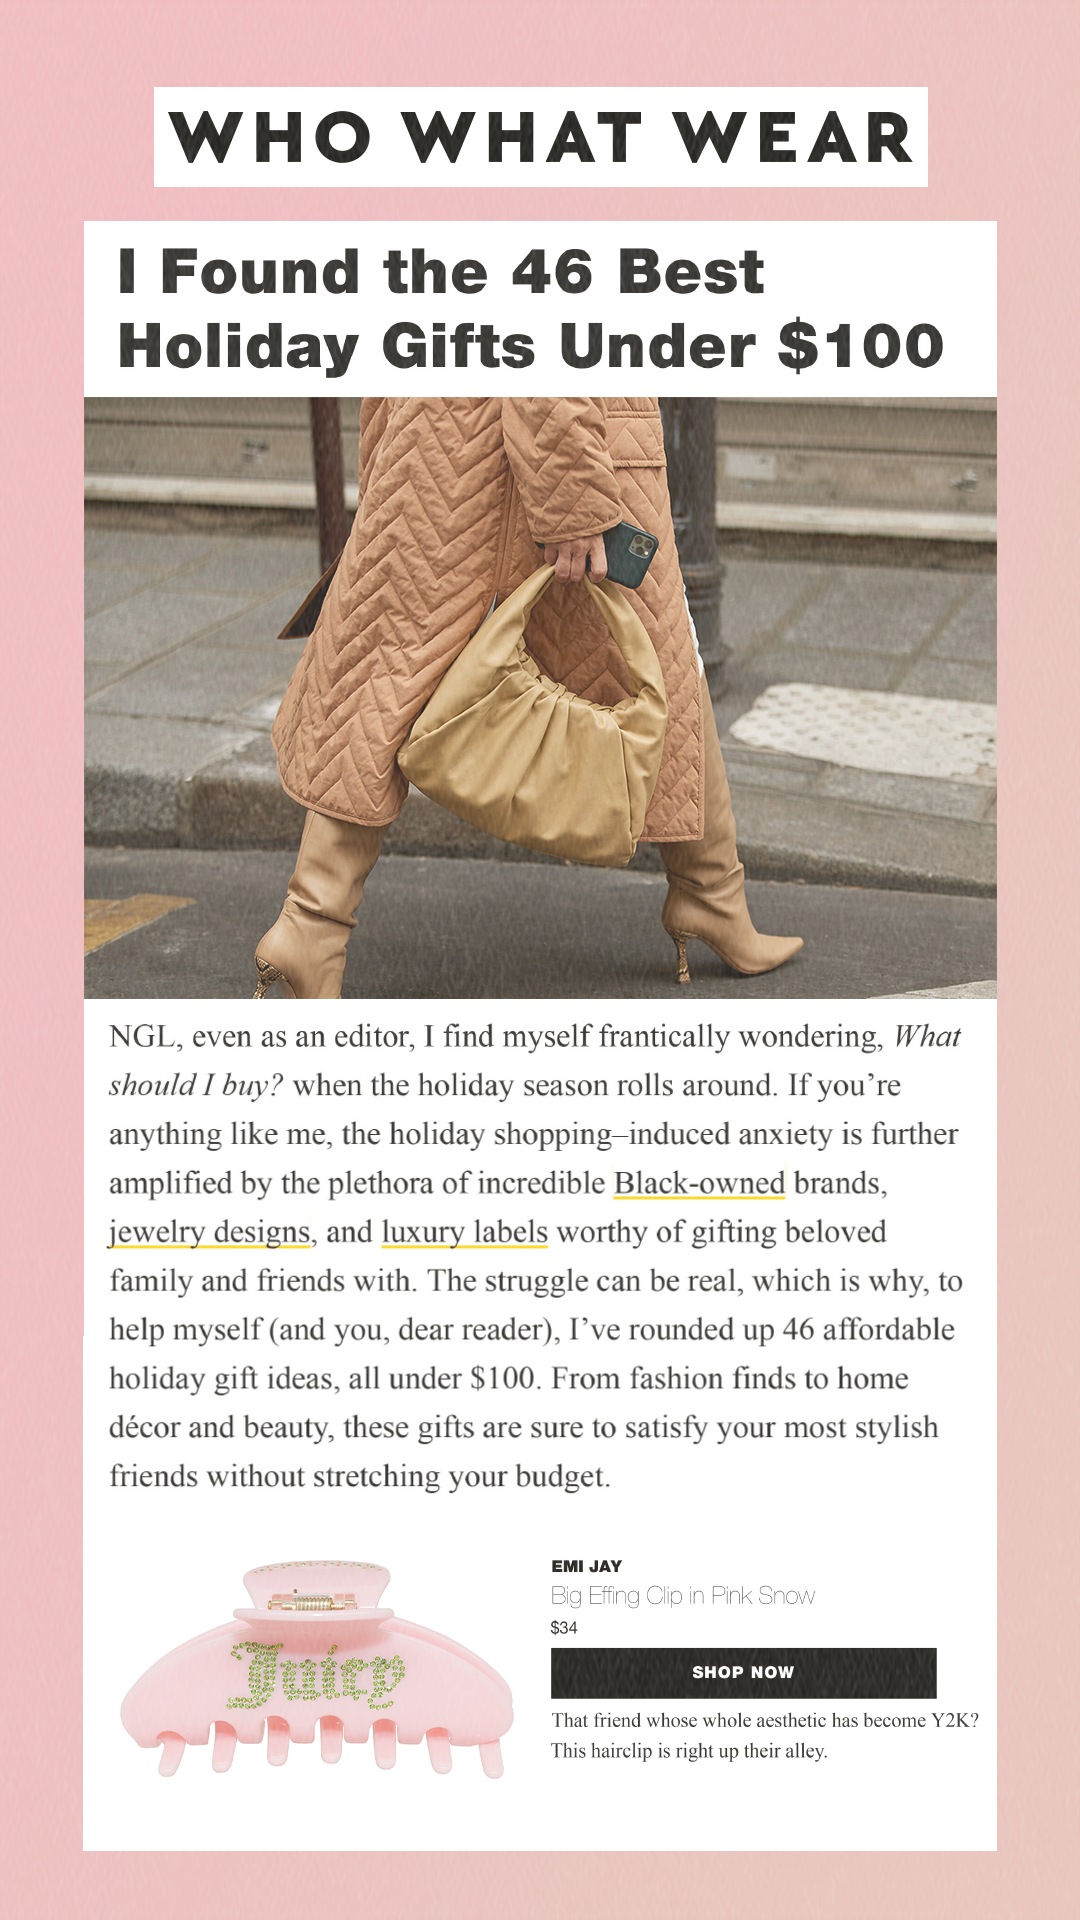 I Found the 46 Best Holiday Gifts Under $100 NGL, even as an editor, I find myself frantically wondering, What should I buy? when the holiday season rolls around. If you’re anything like me, the holiday shopping–induced anxiety is further amplified by the plethora of incredible Black-owned brands, jewelry designs, and luxury labels worthy of gifting beloved family and friends with. The struggle can be real, which is why, to help myself (and you, dear reader), I’ve rounded up 46 affordable holiday gift ideas, all under $100. From fashion finds to home décor and beauty, these gifts are sure to satisfy your most stylish friends without stretching your budget. That friend whose whole aesthetic has become Y2K? This hairclip is right up their alley.